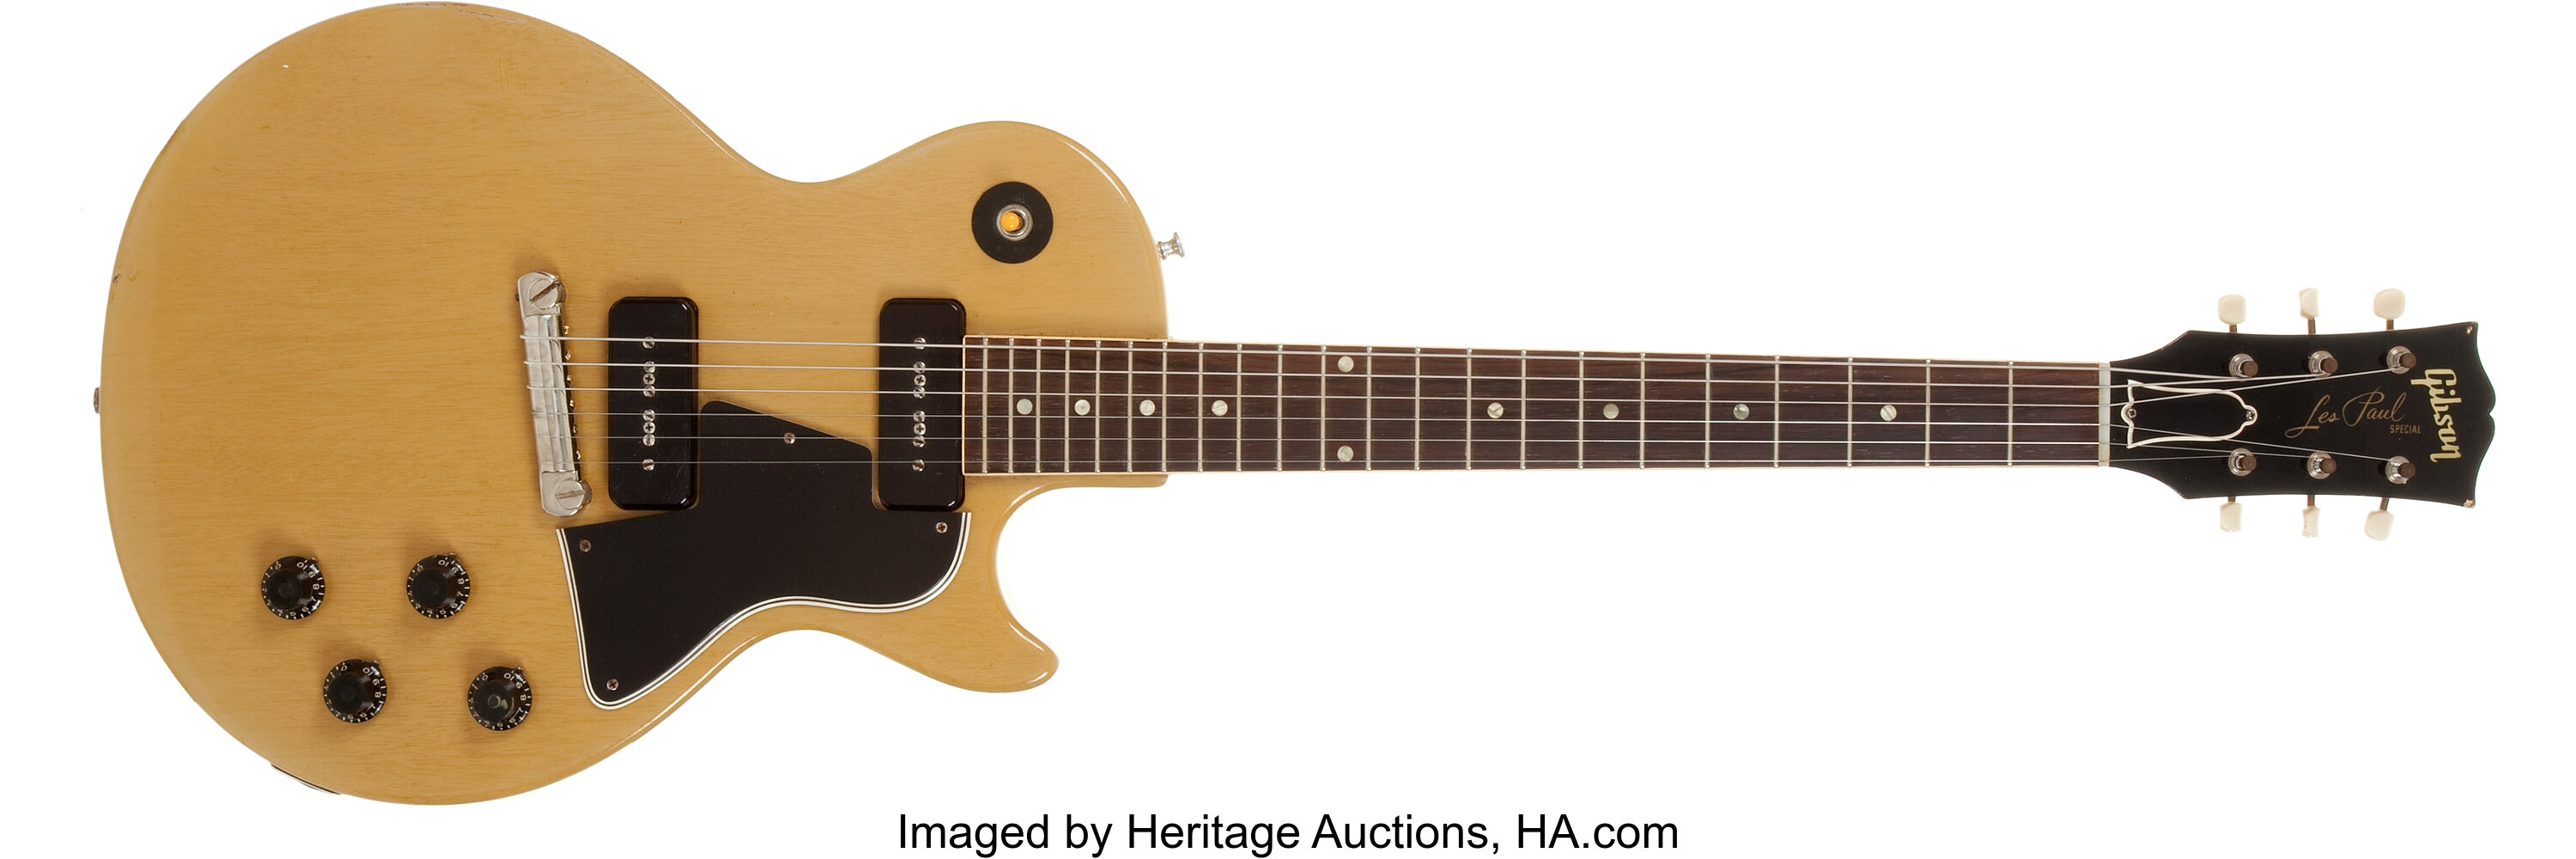 1958 Gibson Les Paul Special Tv Yellow Electric Guitar 8 3436 Lot Heritage Auctions